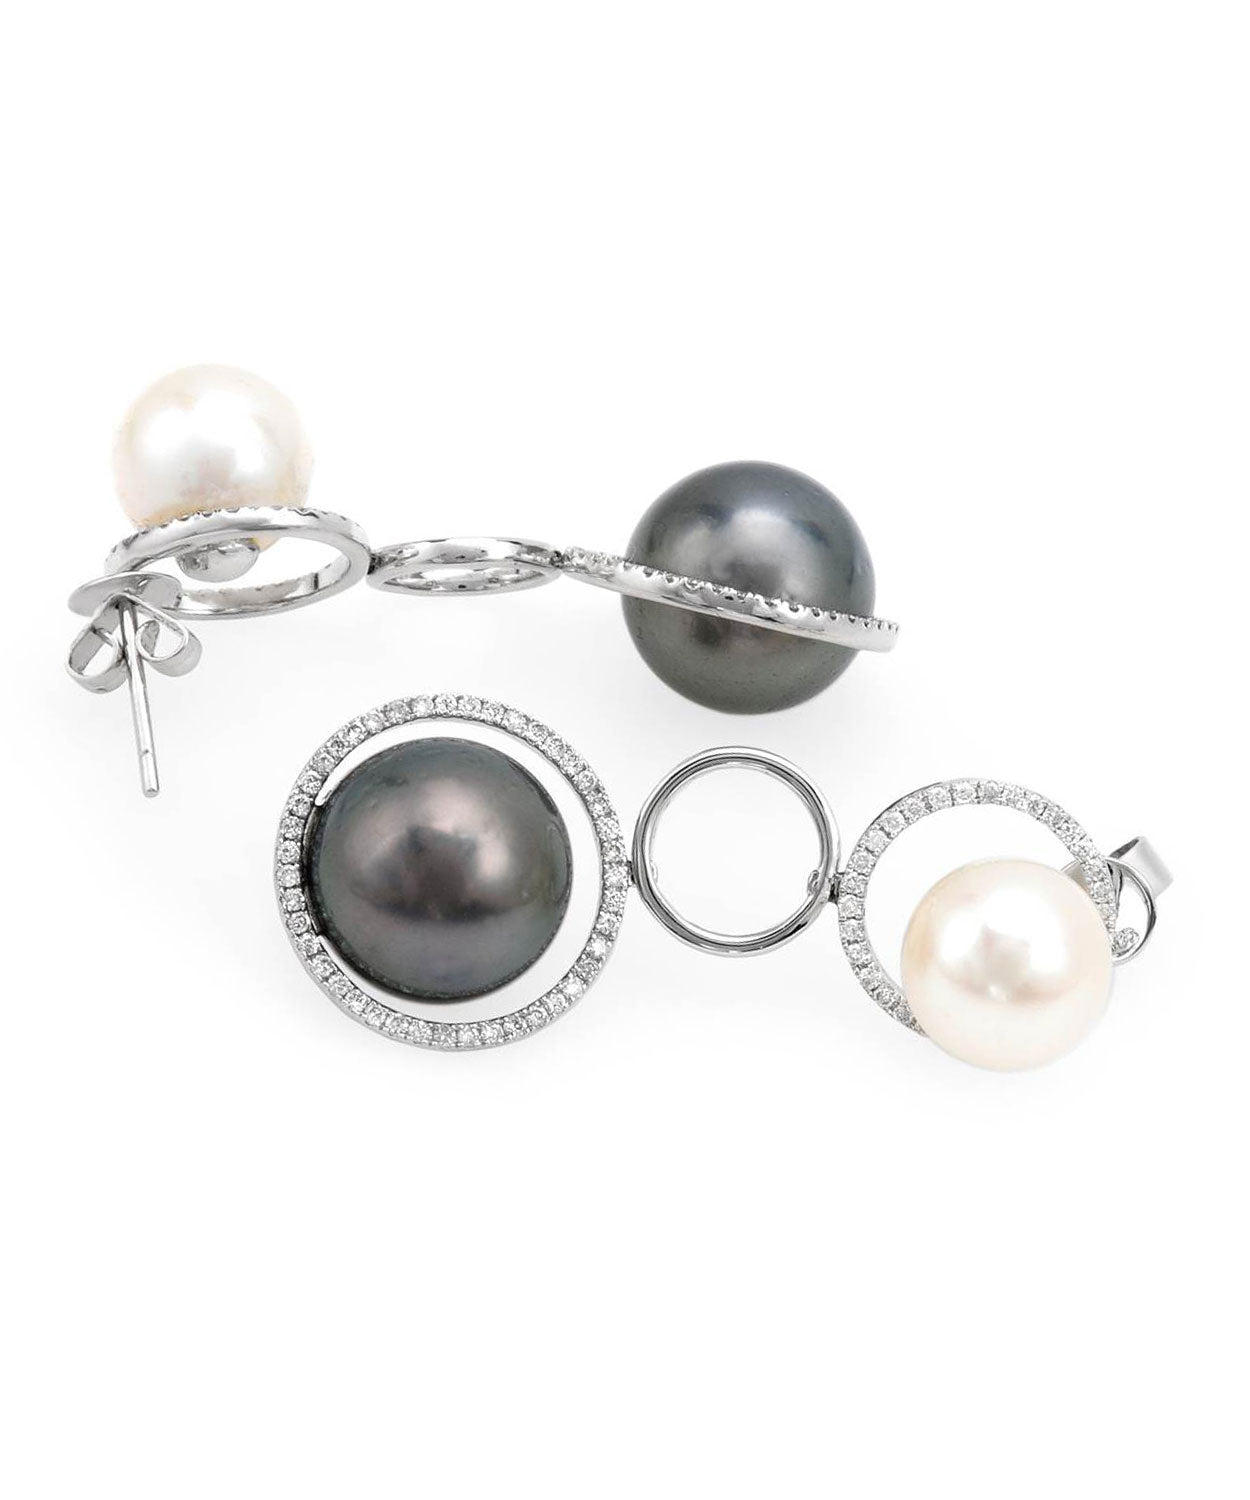 Black & White Collection 0.80 ctw Natural Freshwater Pearl and Diamond 18k White Gold Earrings View 2